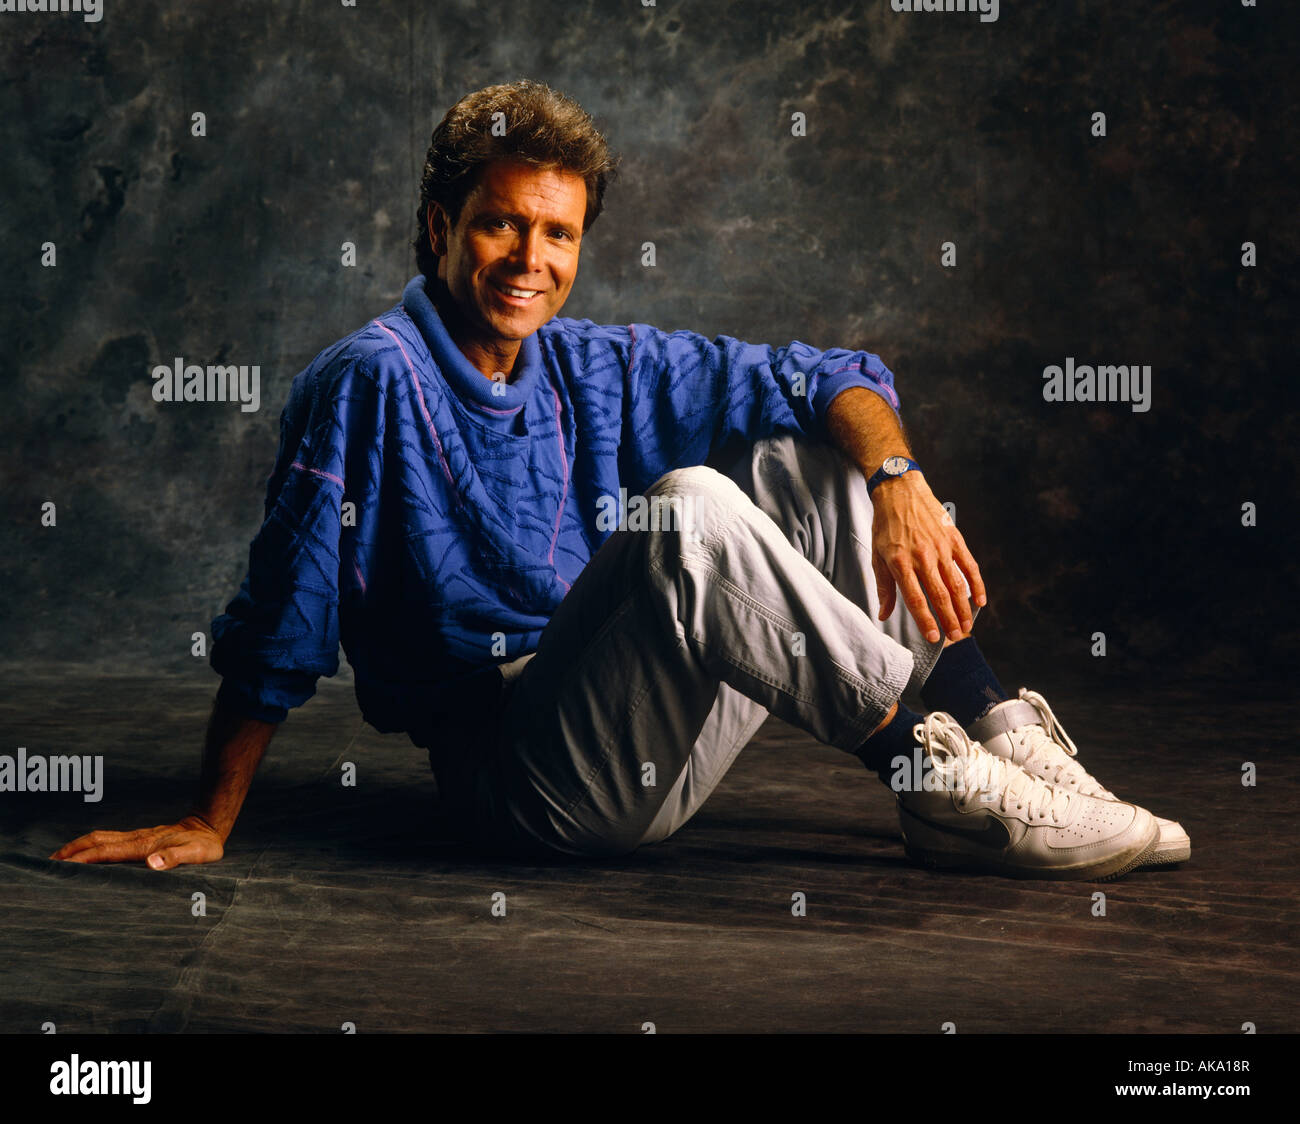 Cliff Richard High Resolution Stock Photography and Images   Alamy 1300x1124